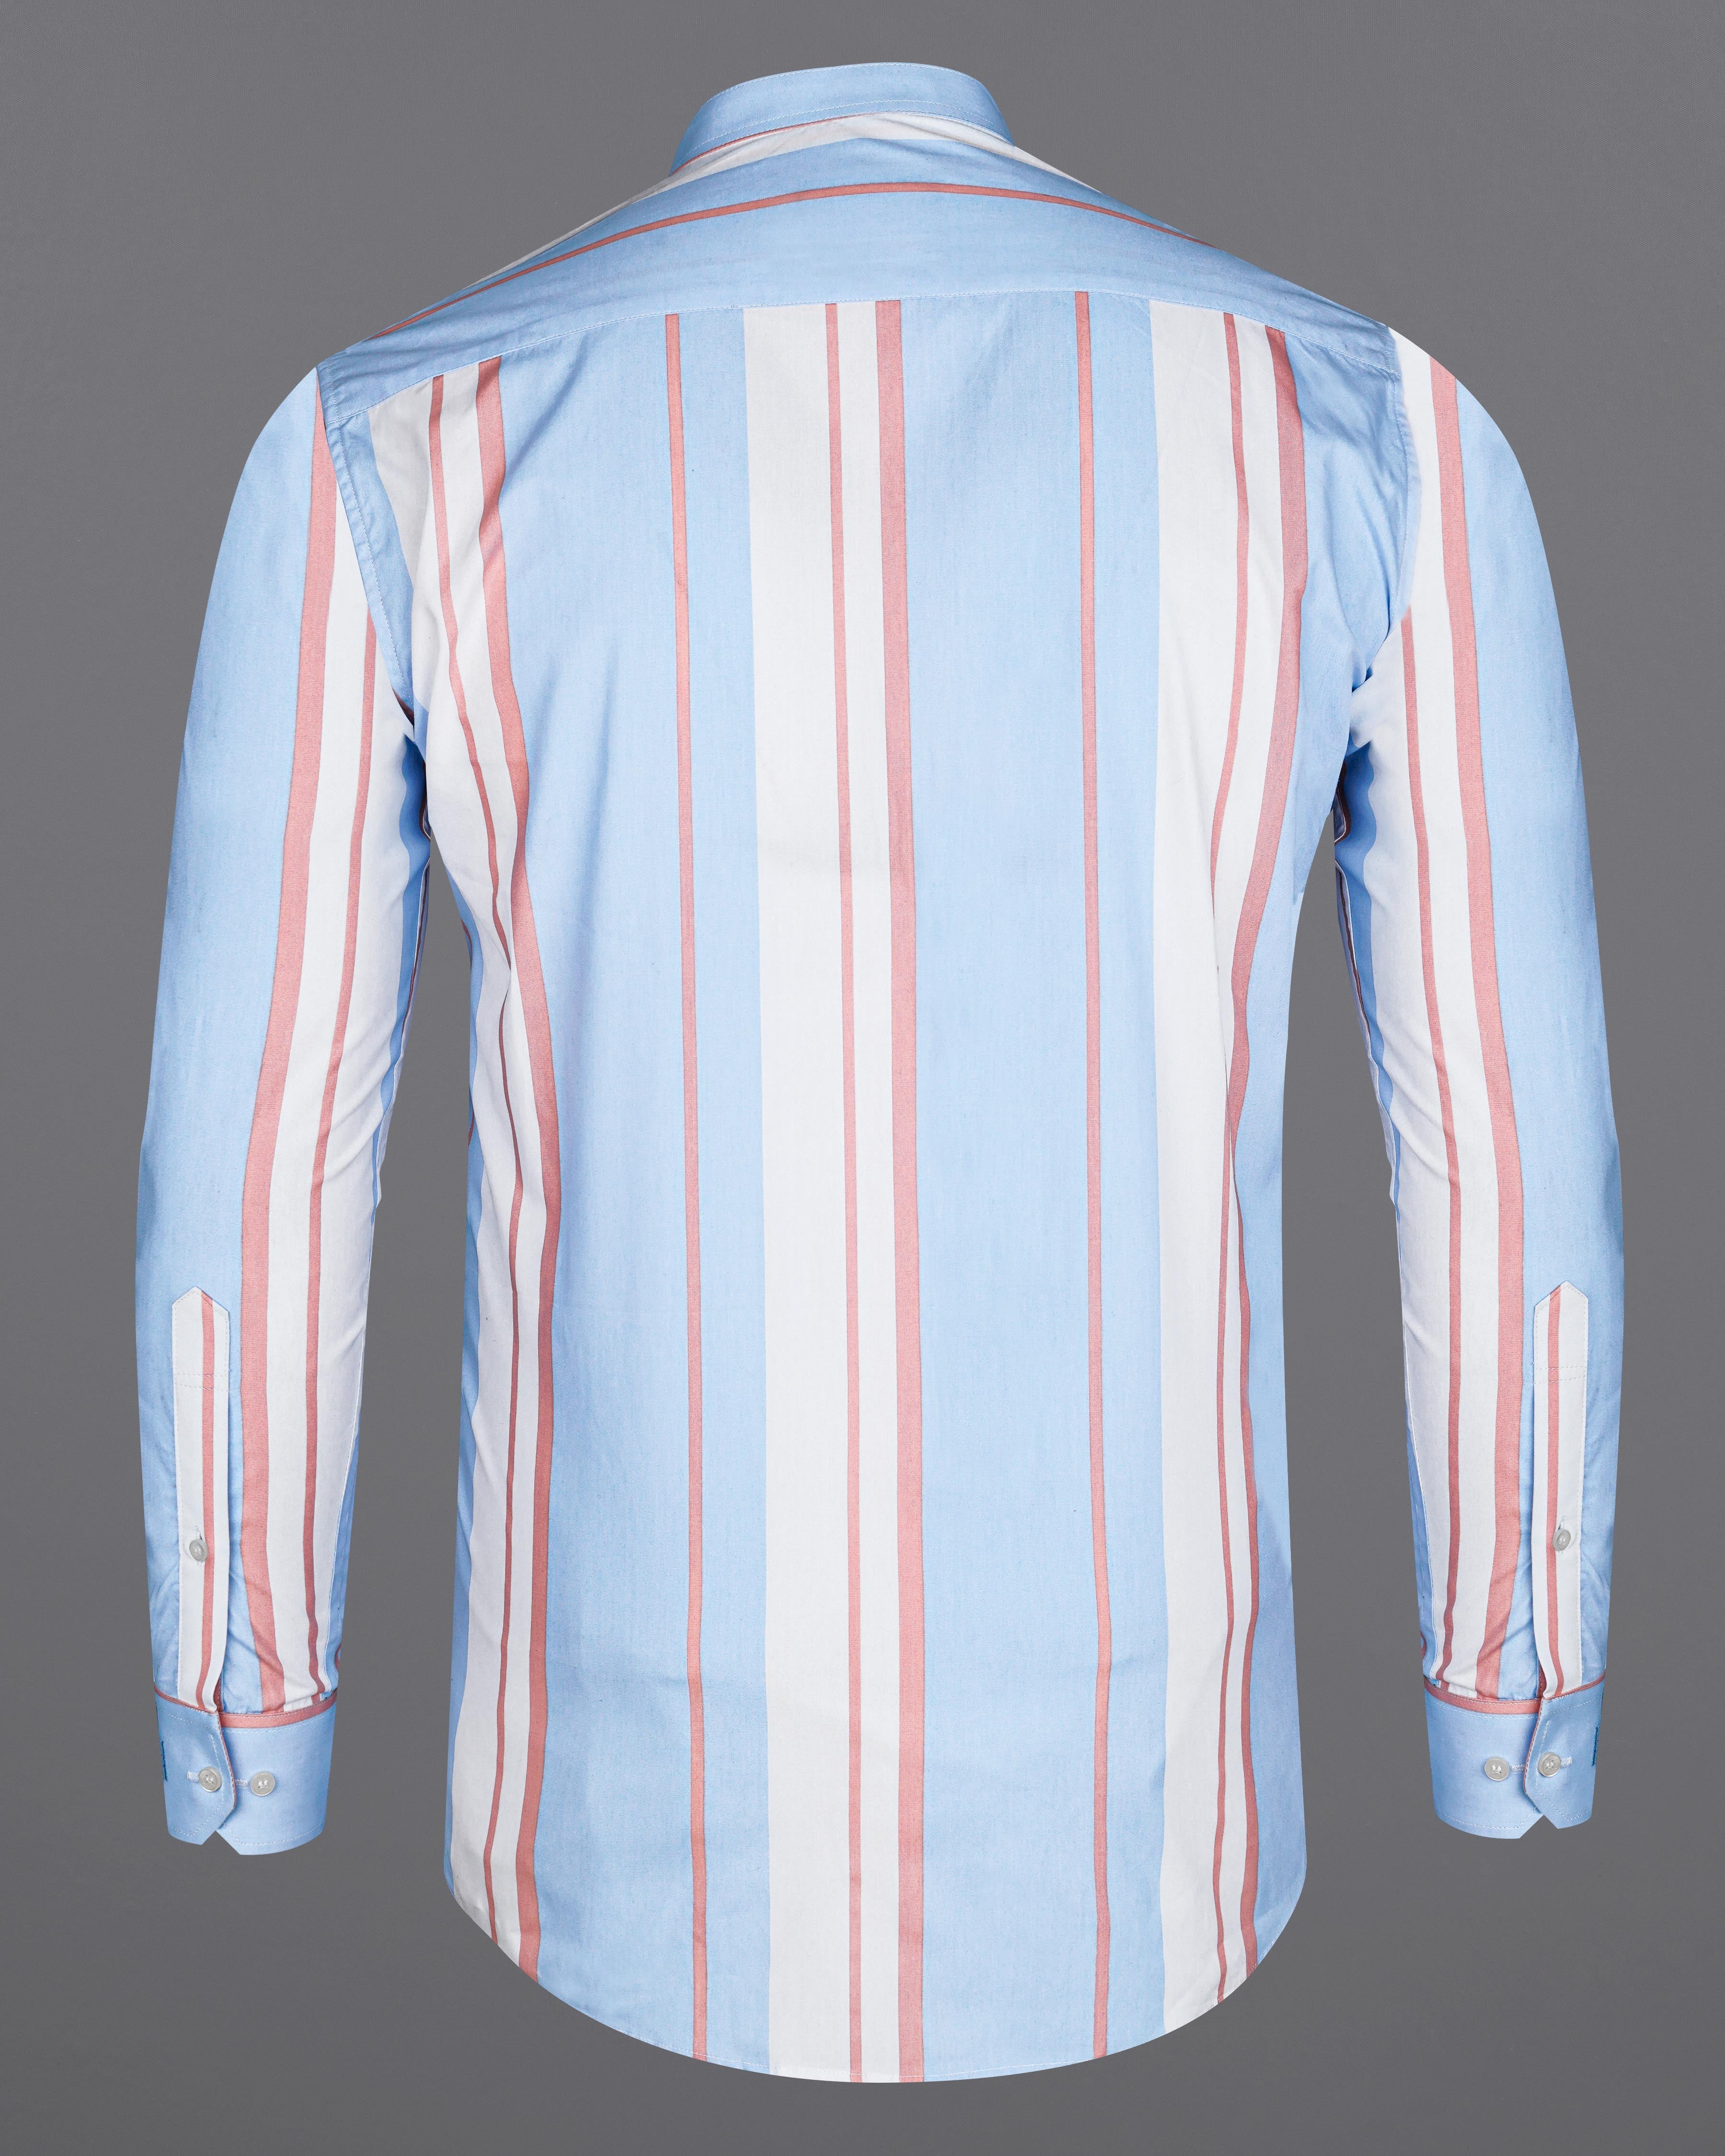 Bright White with Tropical Sky Blue and Daisy Pink Striped Premium Cotton Shirt 8453-M-38,8453-M-H-38,8453-M-39,8453-M-H-39,8453-M-40,8453-M-H-40,8453-M-42,8453-M-H-42,8453-M-44,8453-M-H-44,8453-M-46,8453-M-H-46,8453-M-48,8453-M-H-48,8453-M-50,8453-M-H-50,8453-M-52,8453-M-H-52